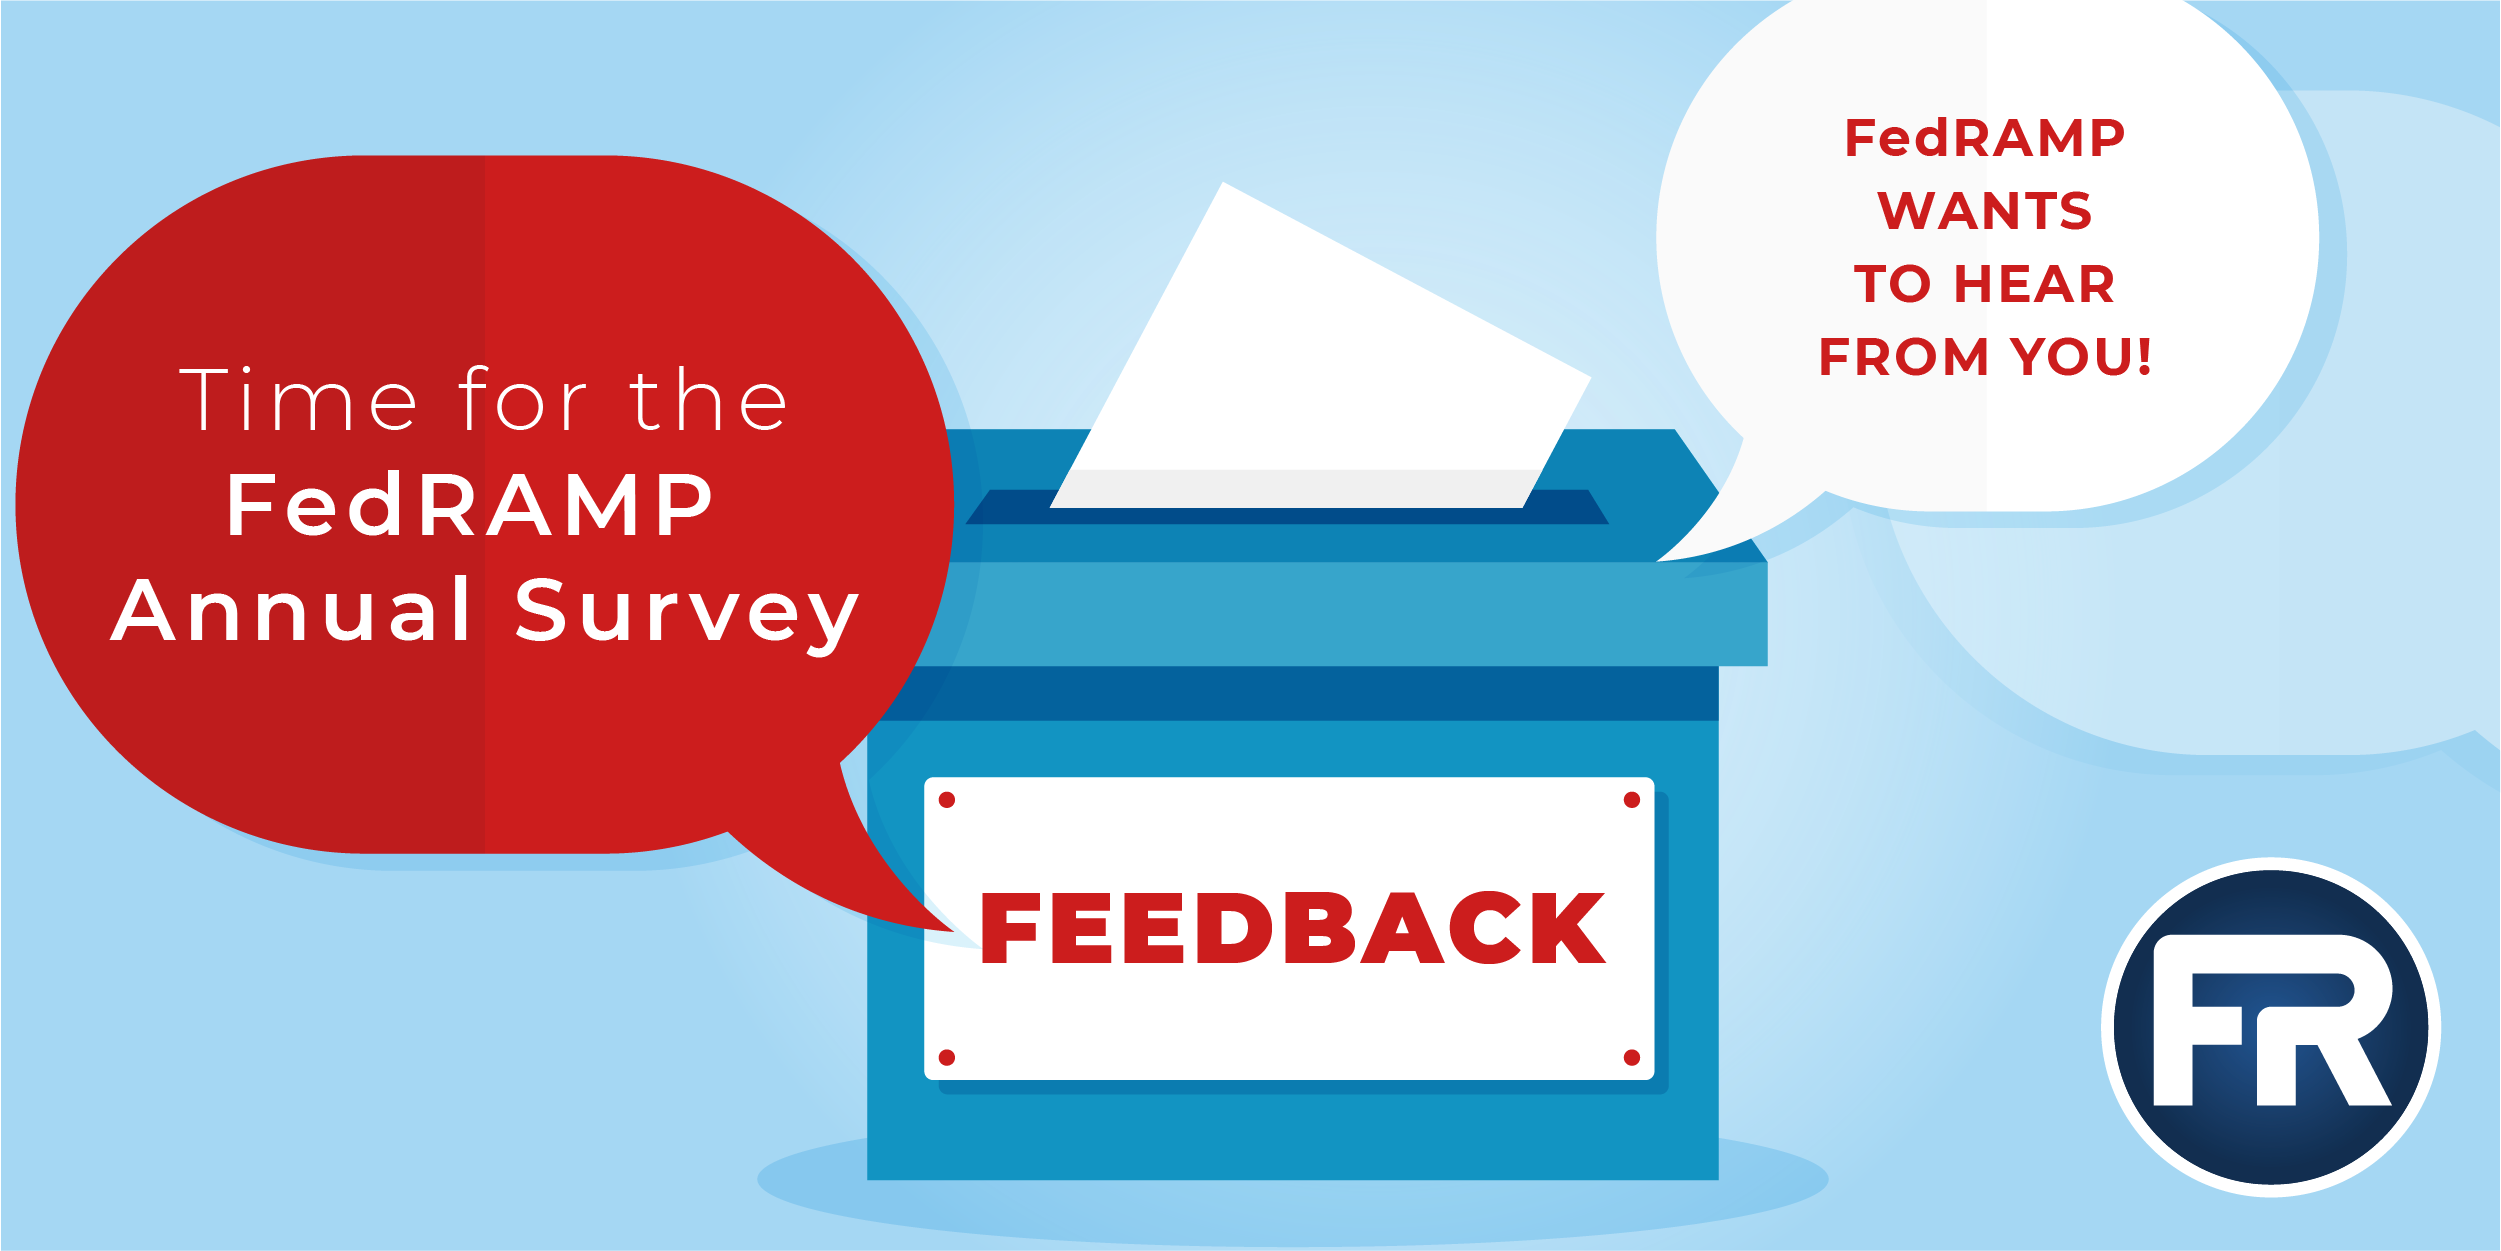 FedRAMP Releases the FY21 Annual Survey!